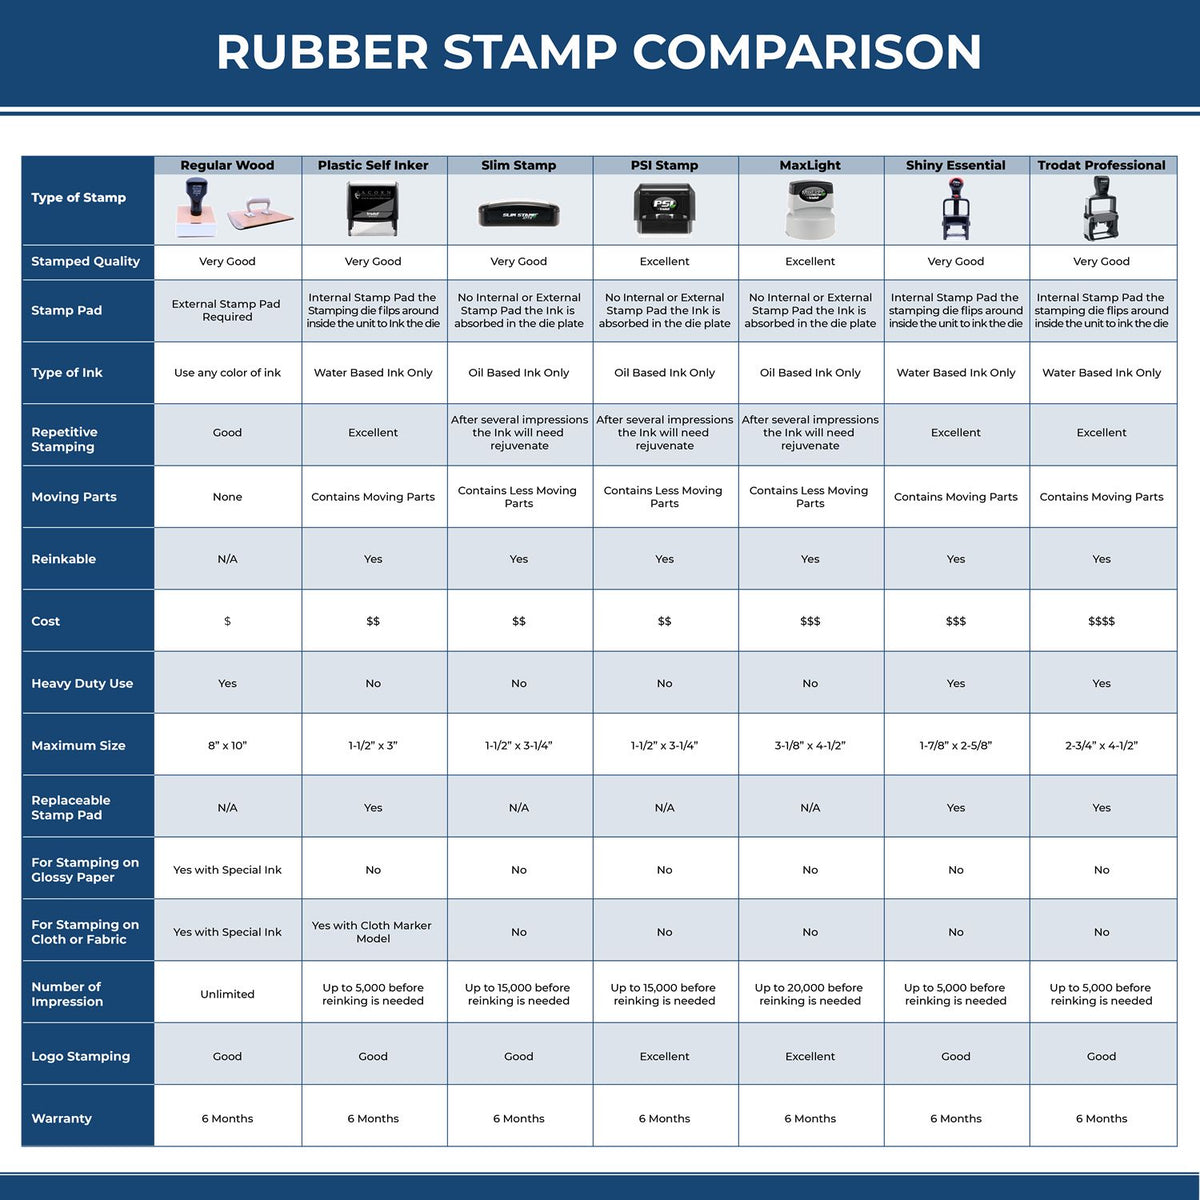 A comparison chart for the different types of mount models available for the Self-Inking Guam Landscape Architect Stamp.